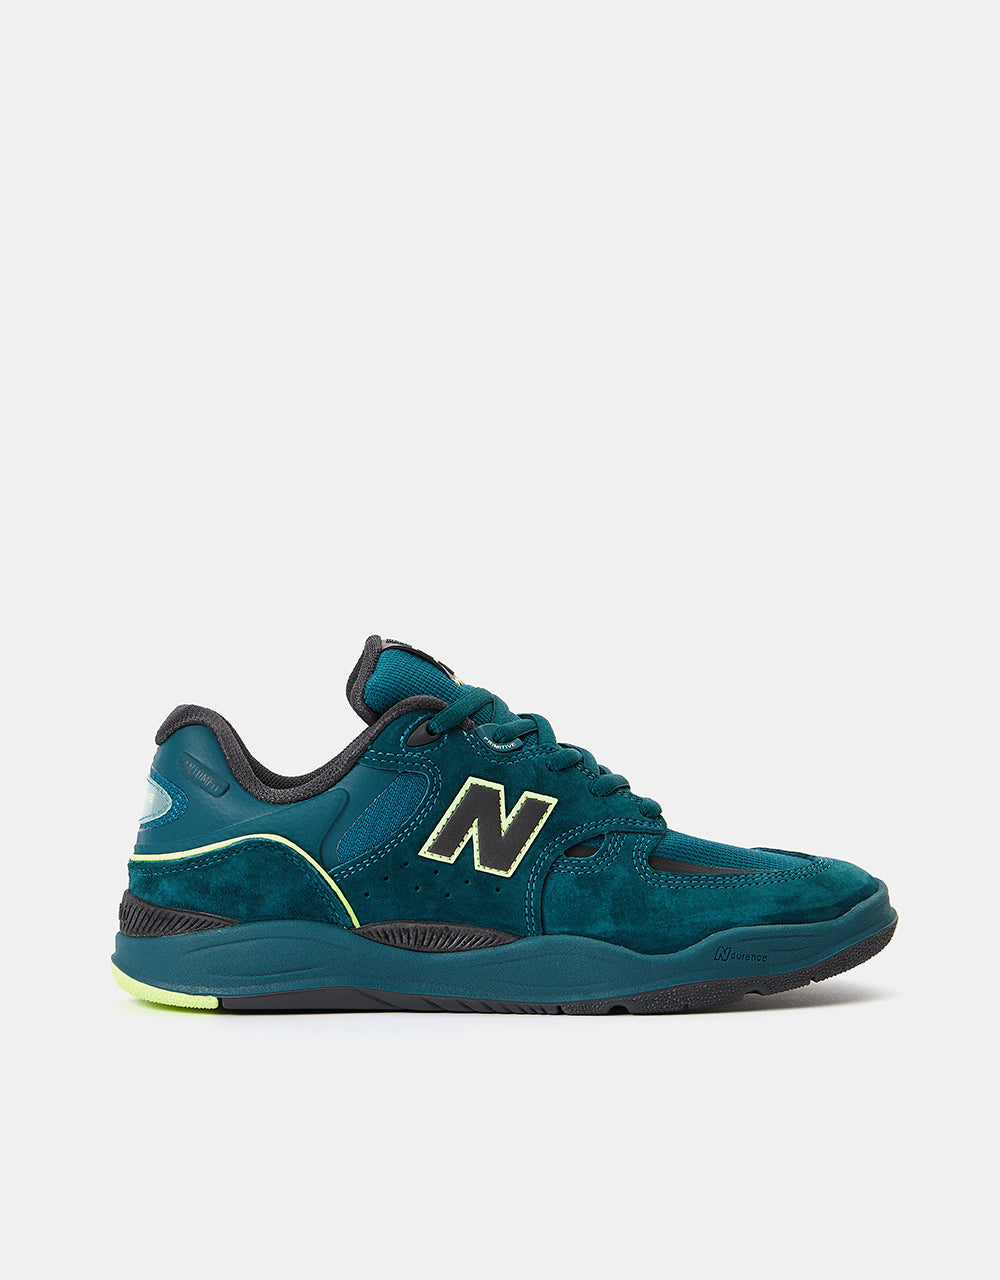 New Balance Numeric x Primitive 1010 Skate Shoes - Deep Teal/Lime Gree –  Route One